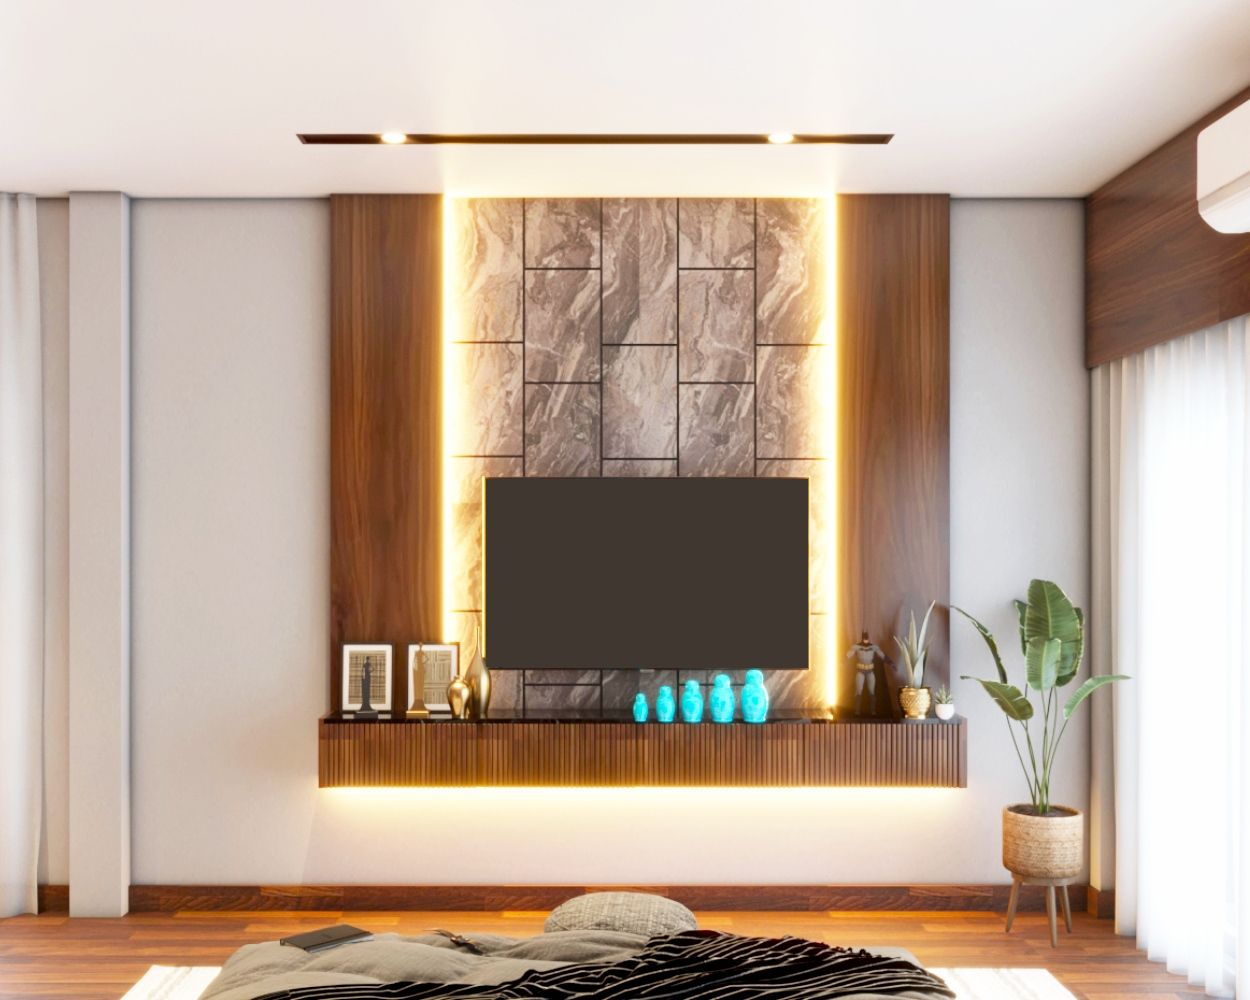 Contemporary Persian Walnut TV Unit Design with Marble Tile Wall and Drawer Storage